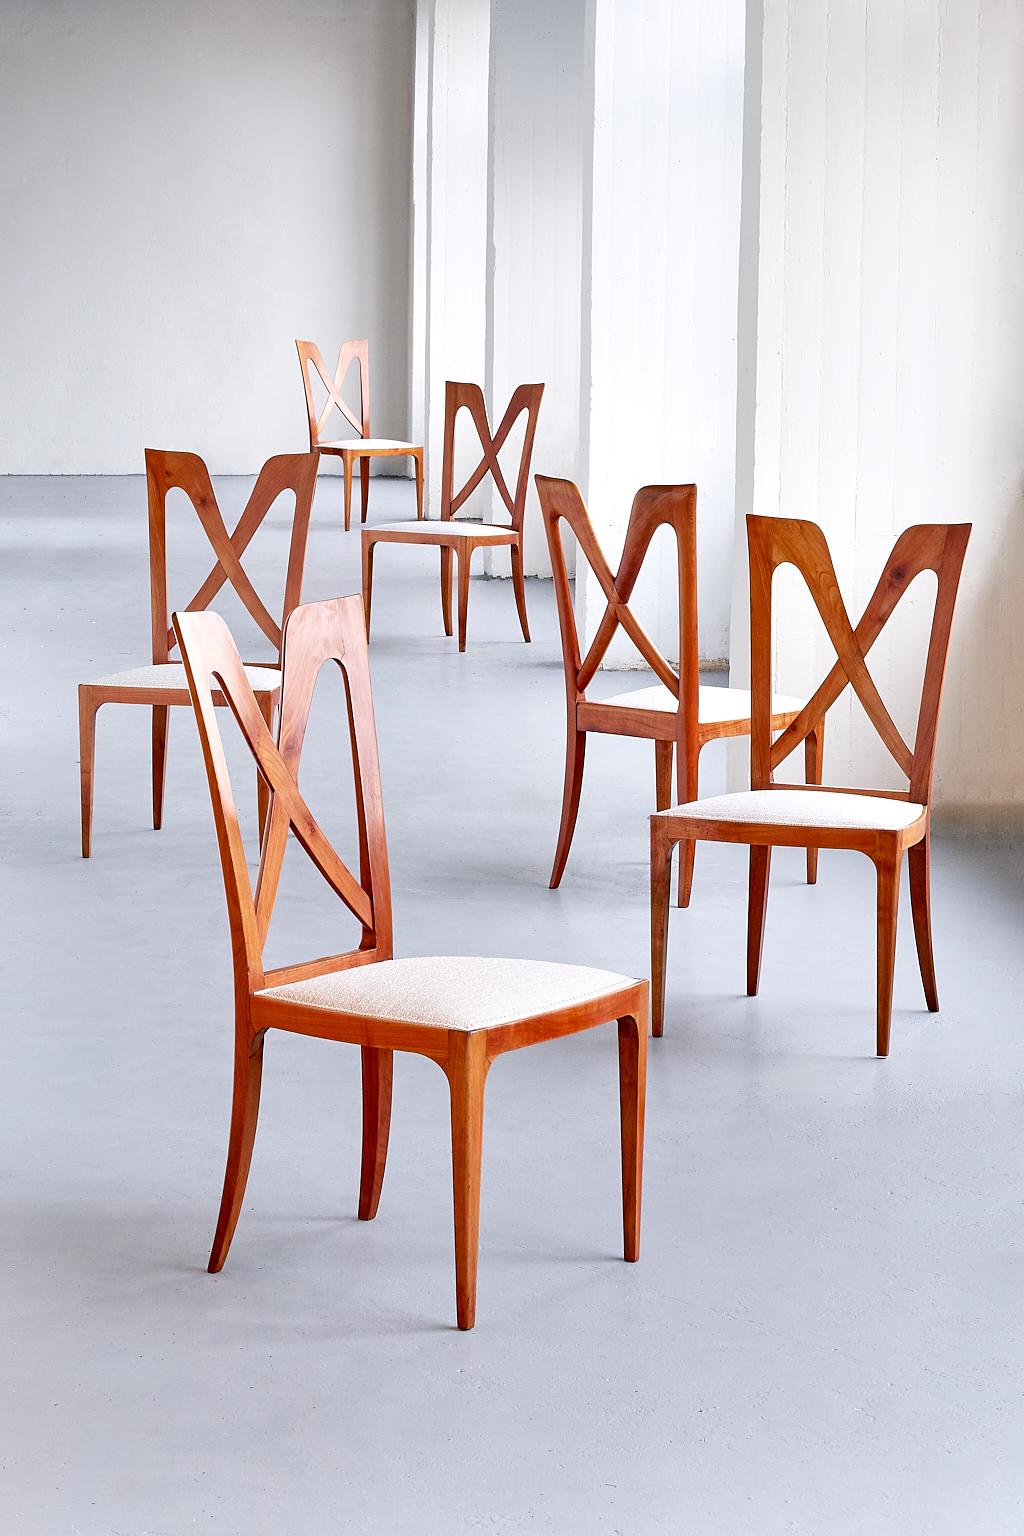 Modern Set of Six Ulderico Carlo Forni Dining Chairs in Cherry Wood, Italy, 1940s For Sale